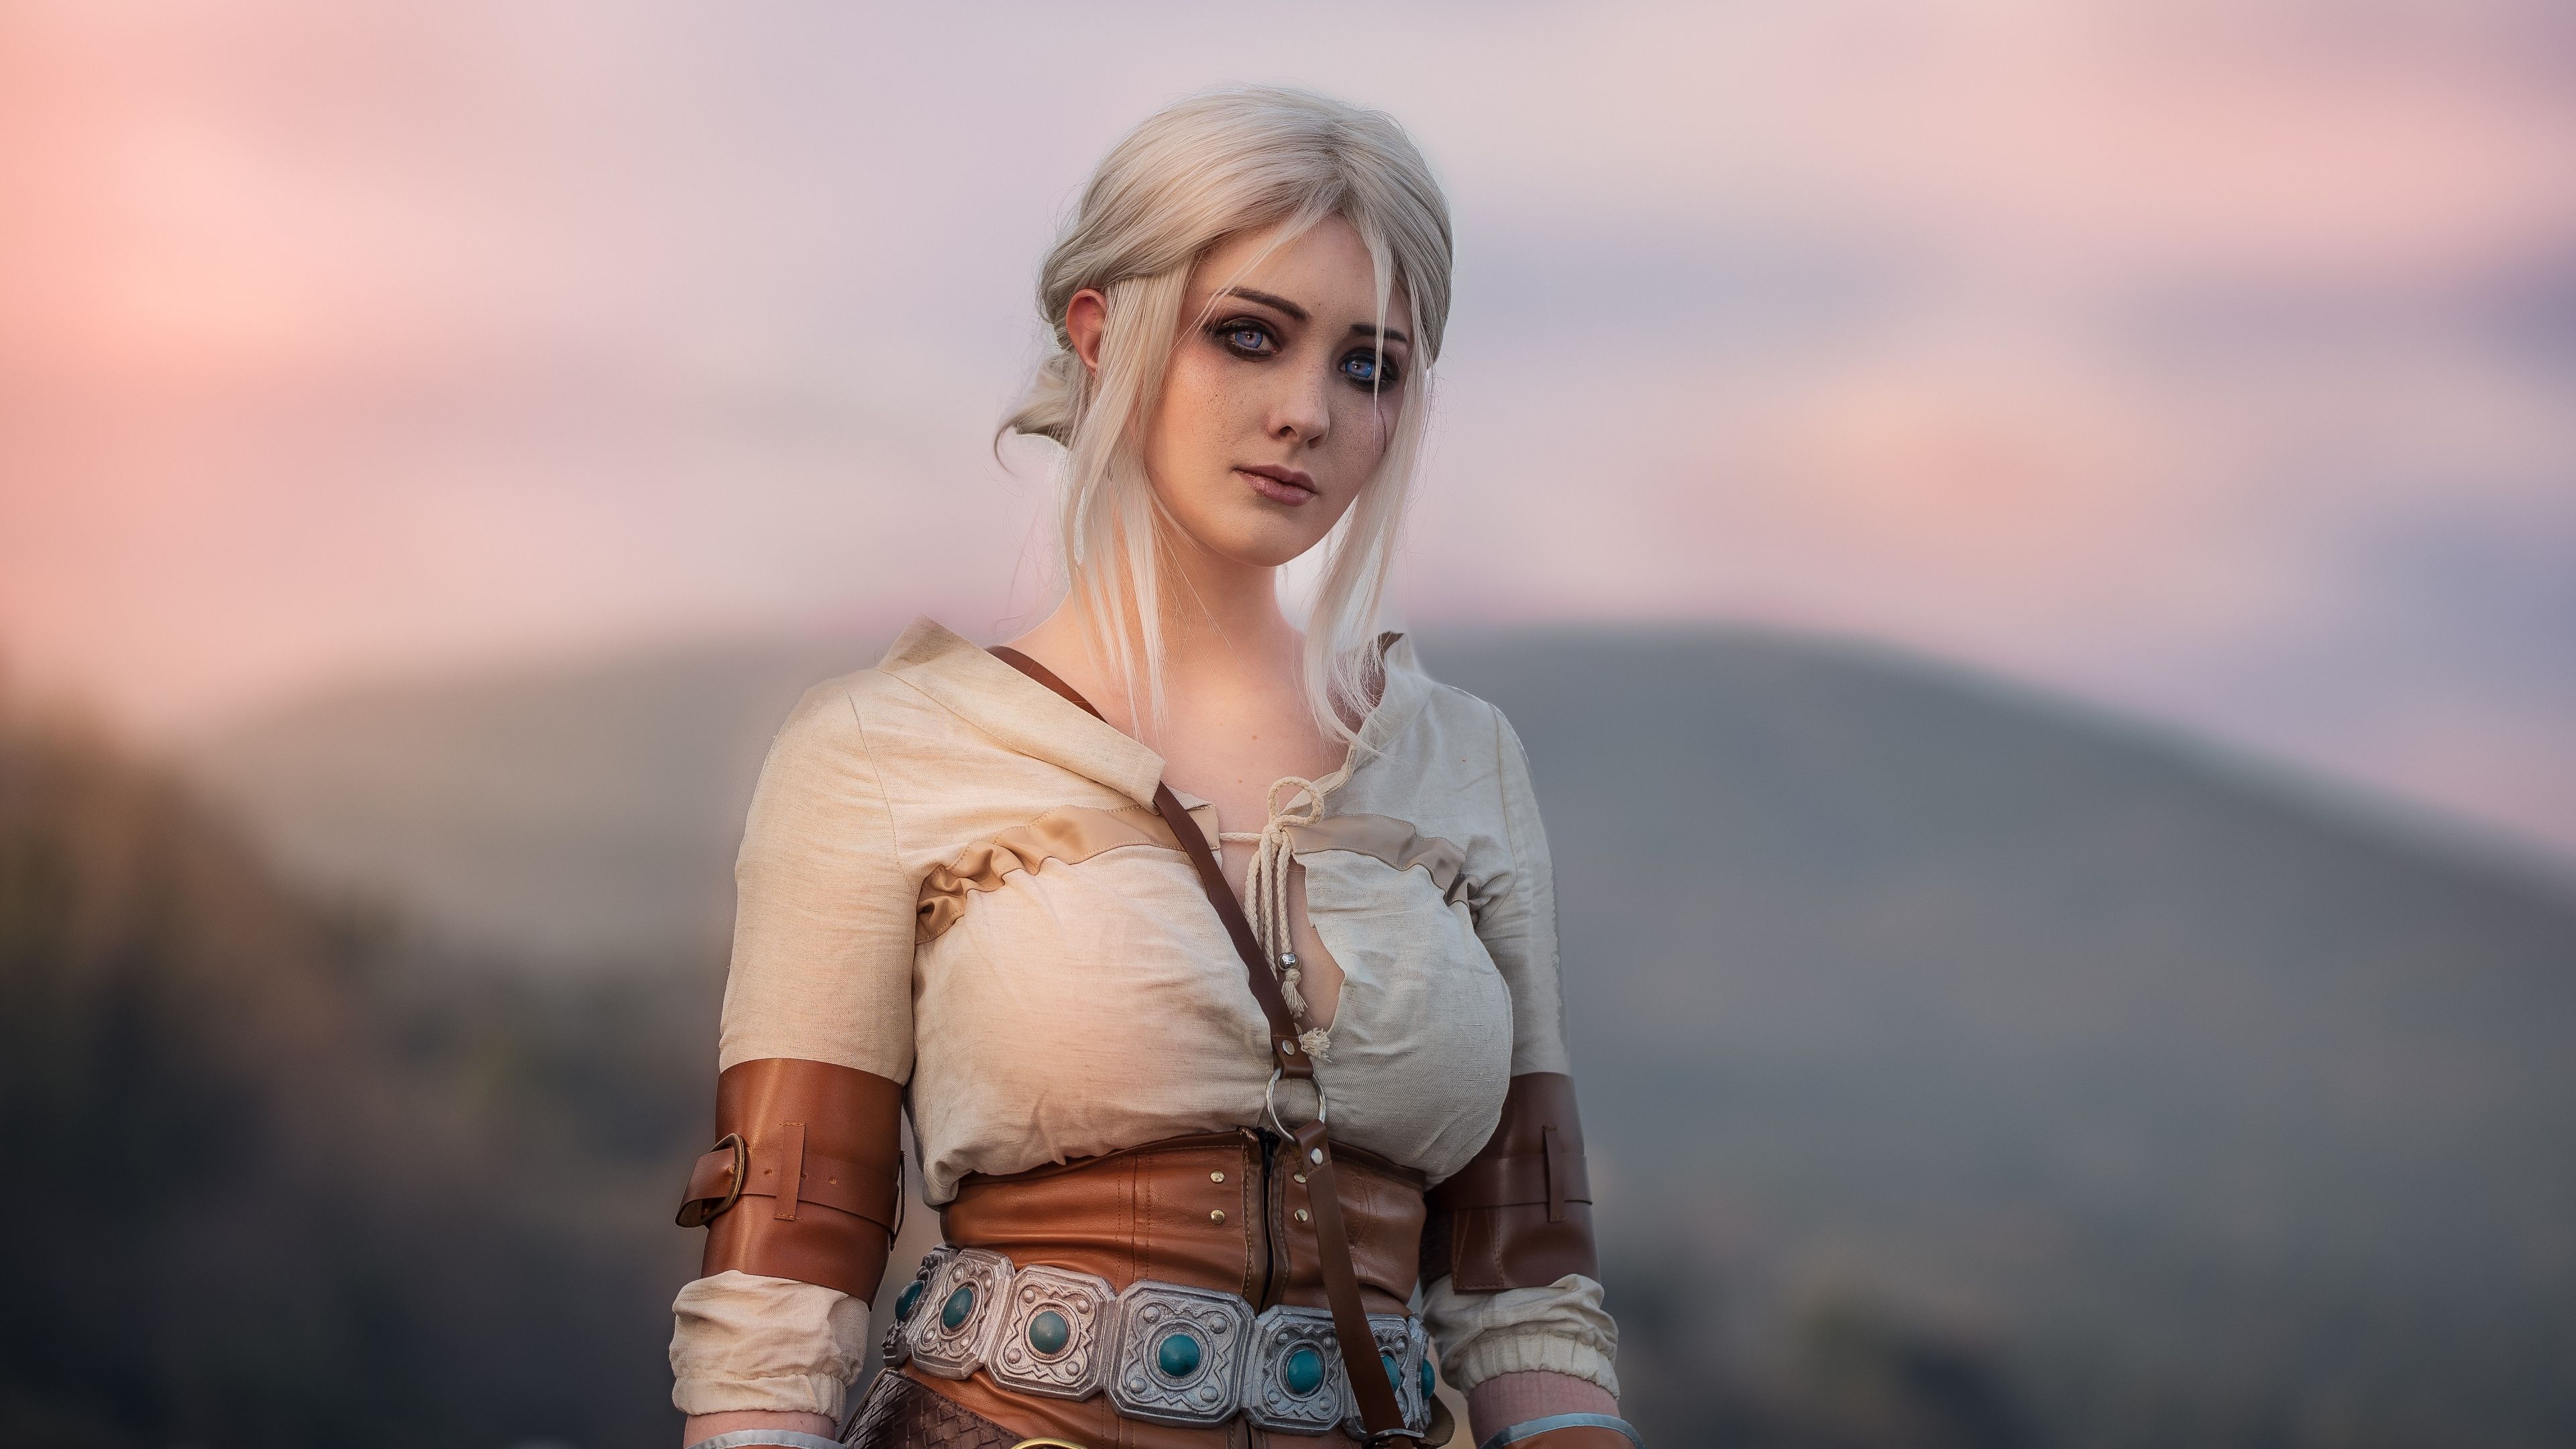 Download 3840x2160 wallpaper ciri, the witcher, video game, girl model, cosplay, 4k, uhd 16: widescreen, 3840x2160 HD image, background, 18453